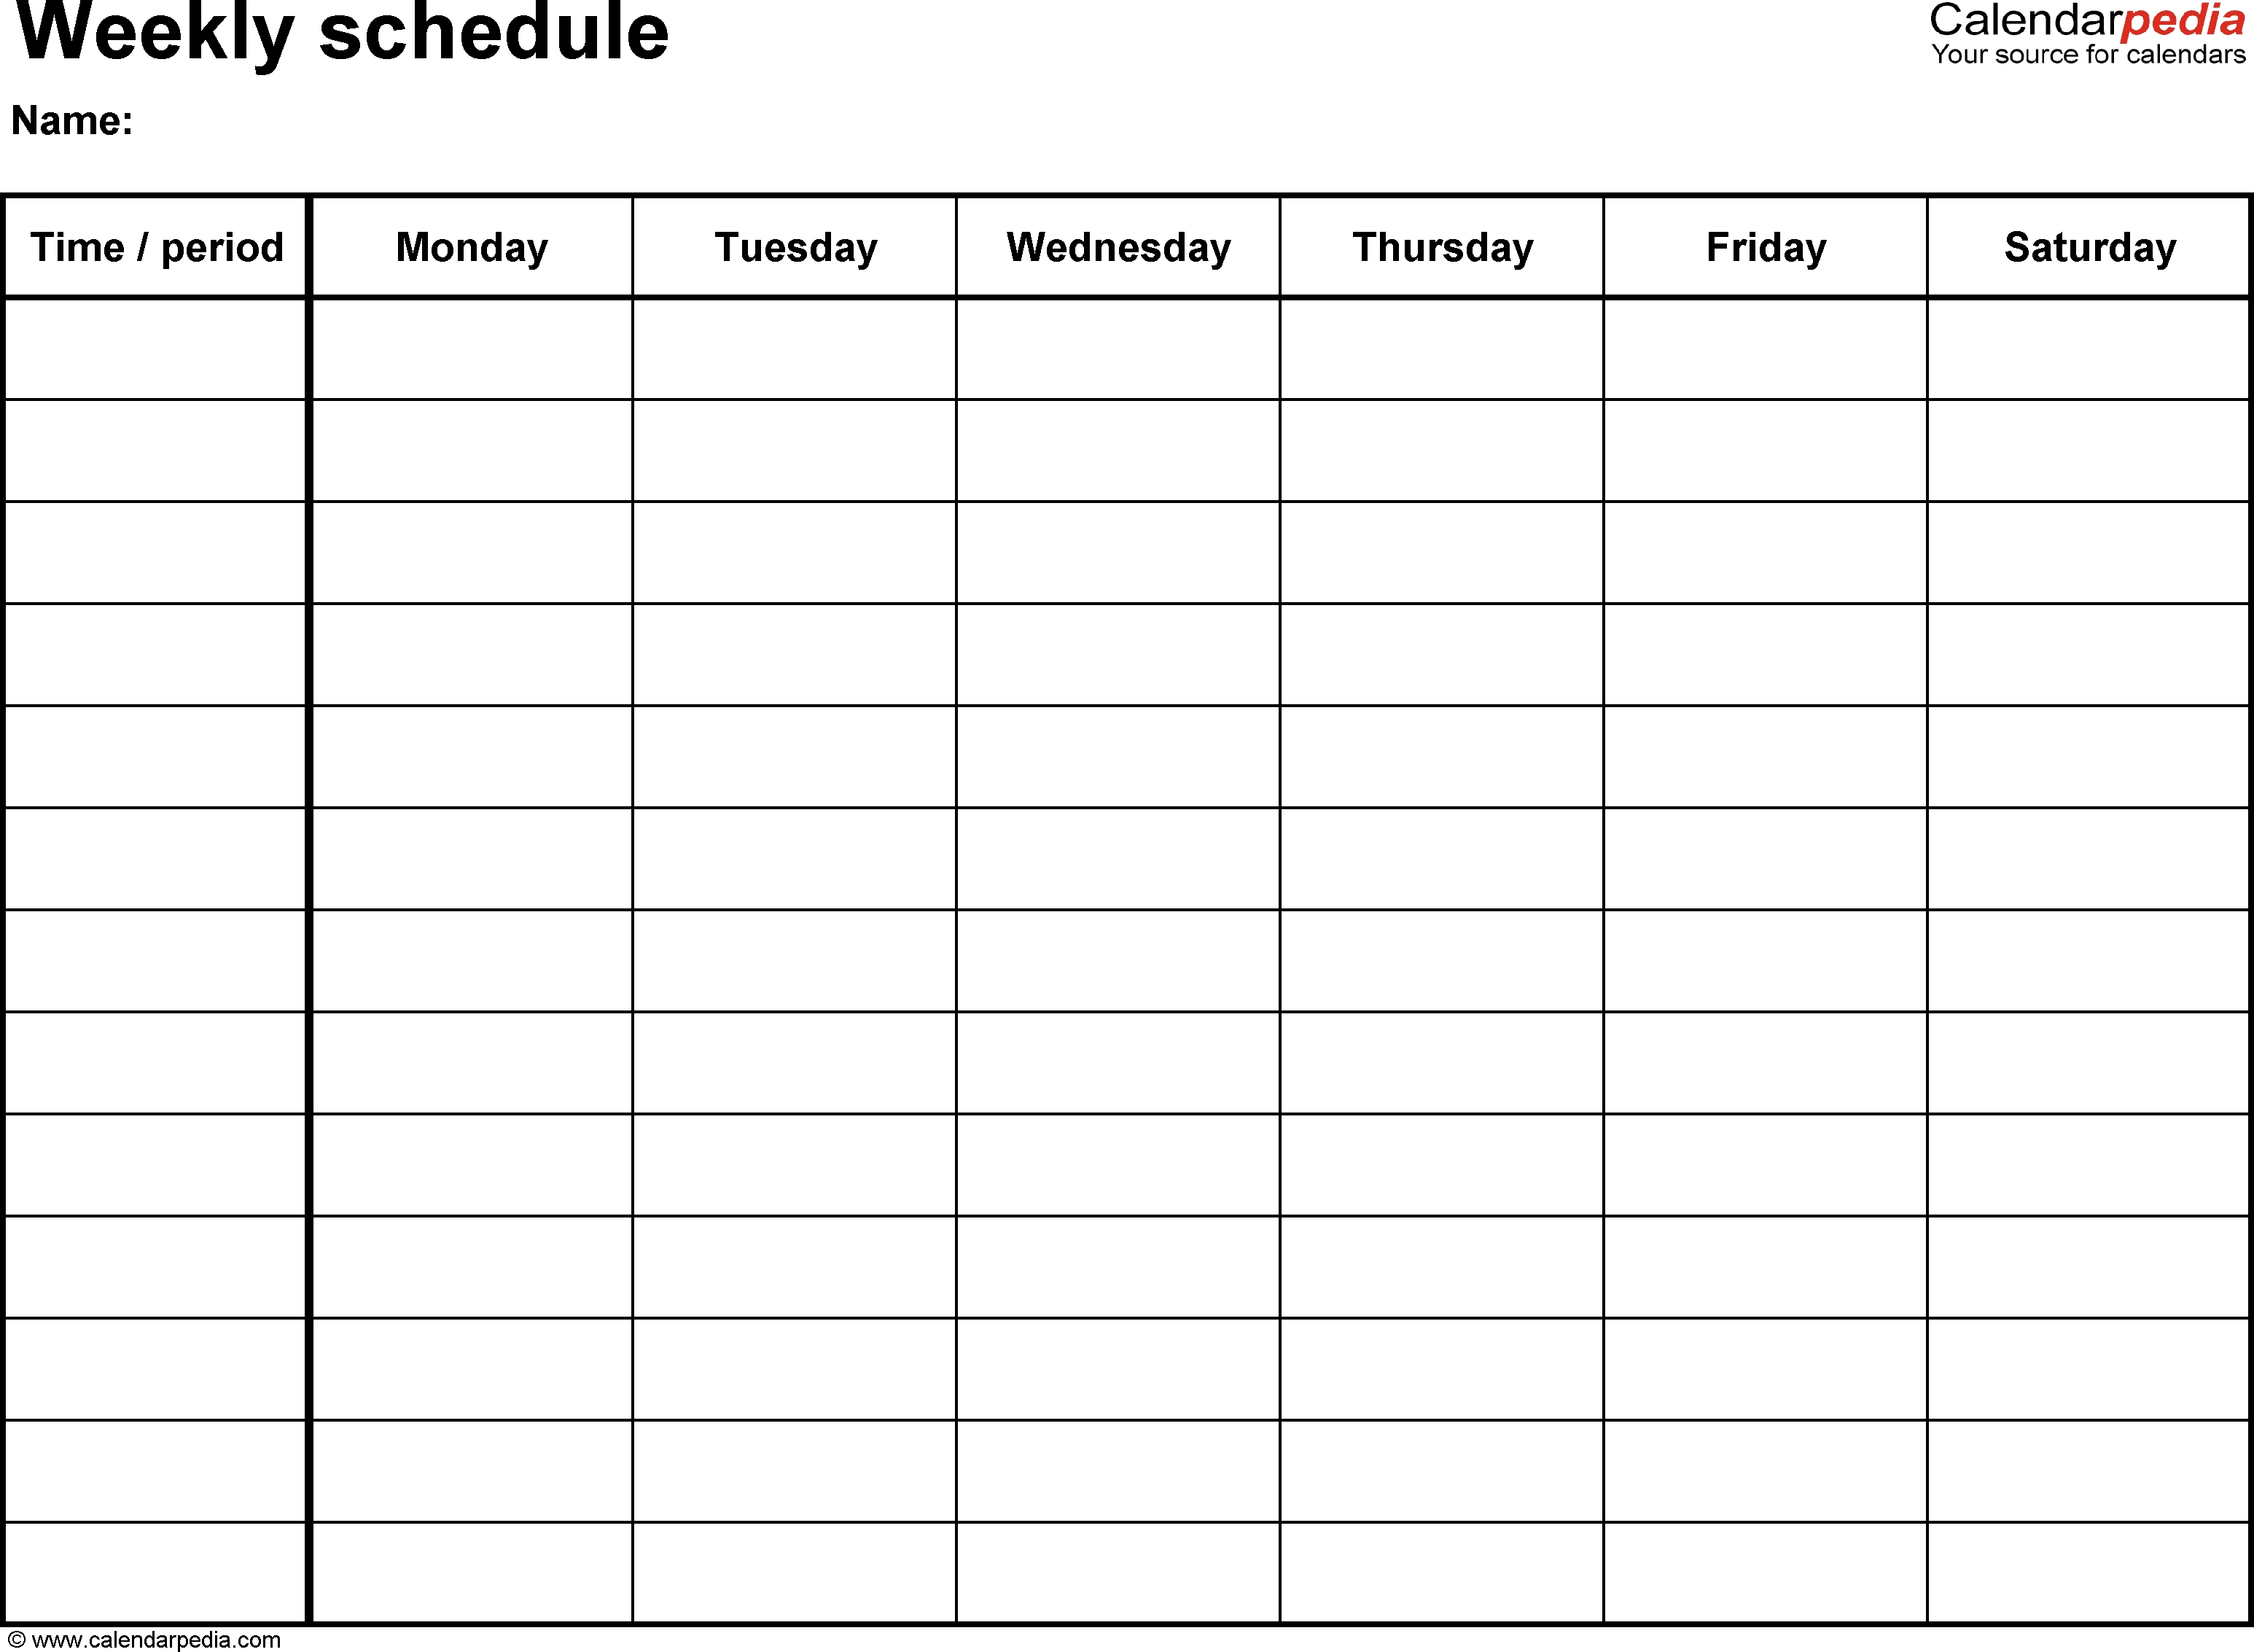 Free Weekly Schedule Templates For Word - 18 Templates inside Monthly Calendar Monday Through Friday